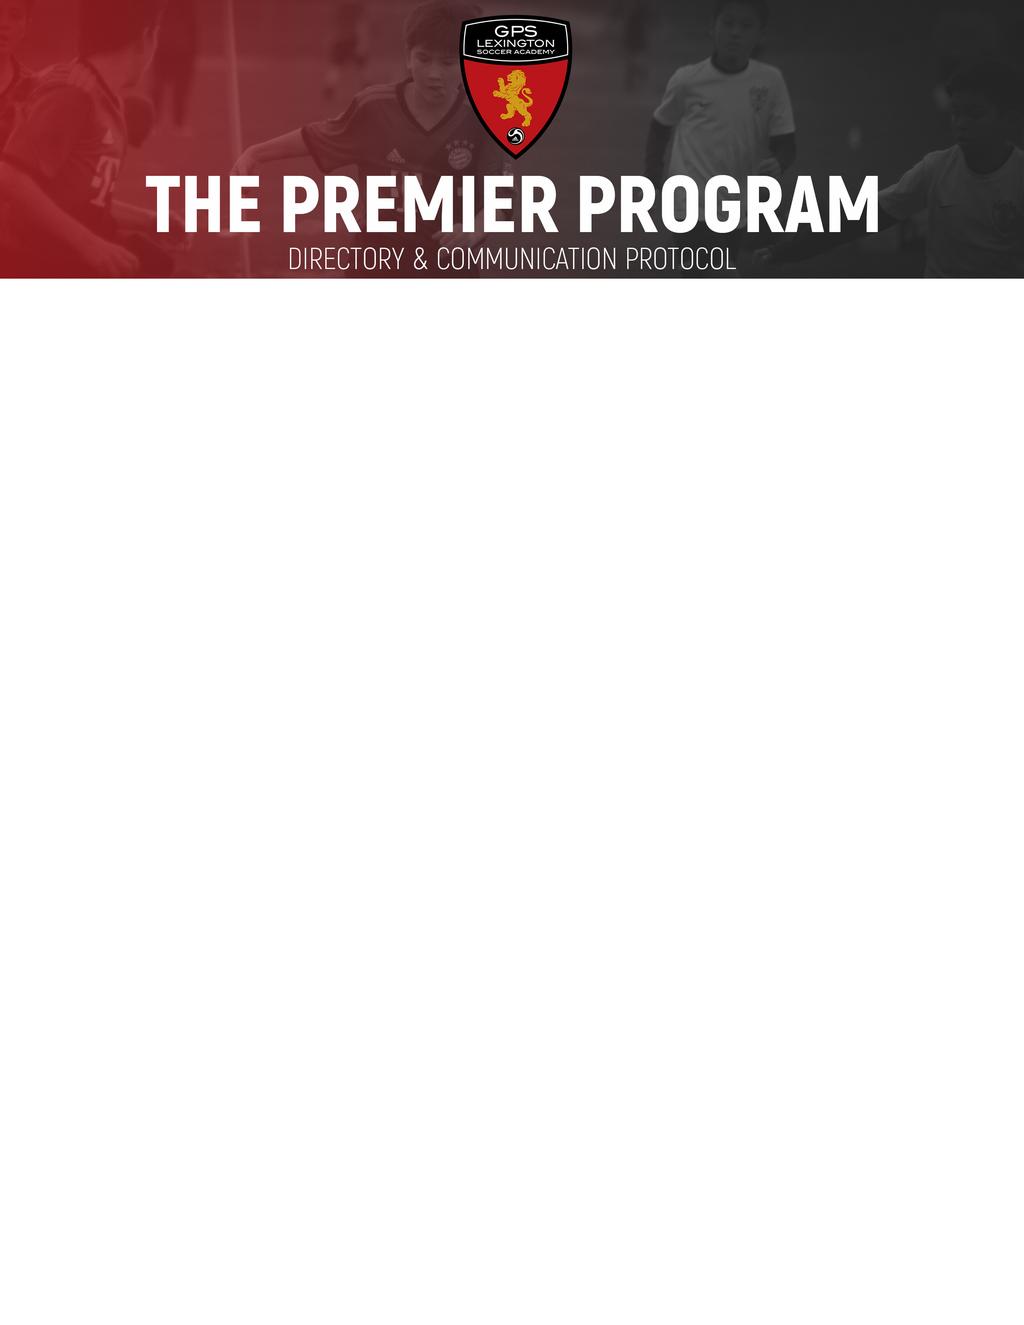 THE GPS LEXINGTON PREMIER PROGRAM: DIRECTORY & COMMUNICATION PROTOCOL Every GPS Lexington team will have the following organizational structure: Head Coach: Responsible for all soccer specifics, the